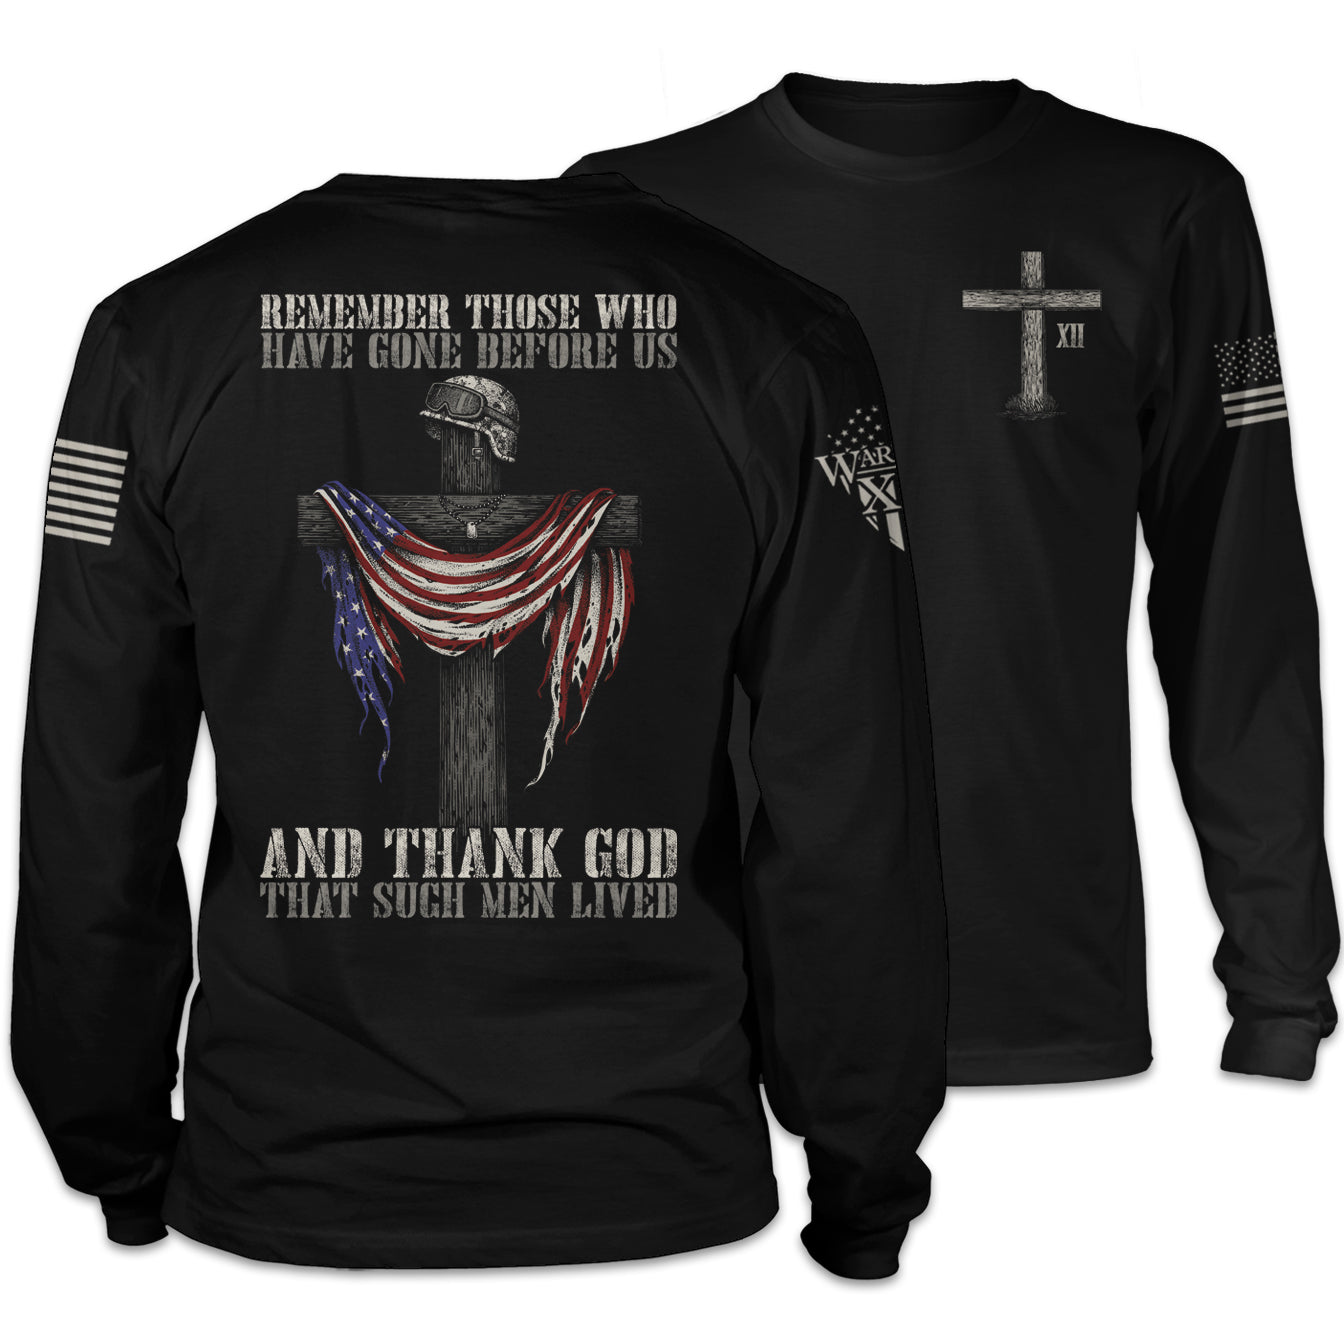 Front & back black long sleeve shirt with the words "Remember those who have gone before us, and thank God that such men lived" with a cross holding a helmet and American flag printed on the shirt.